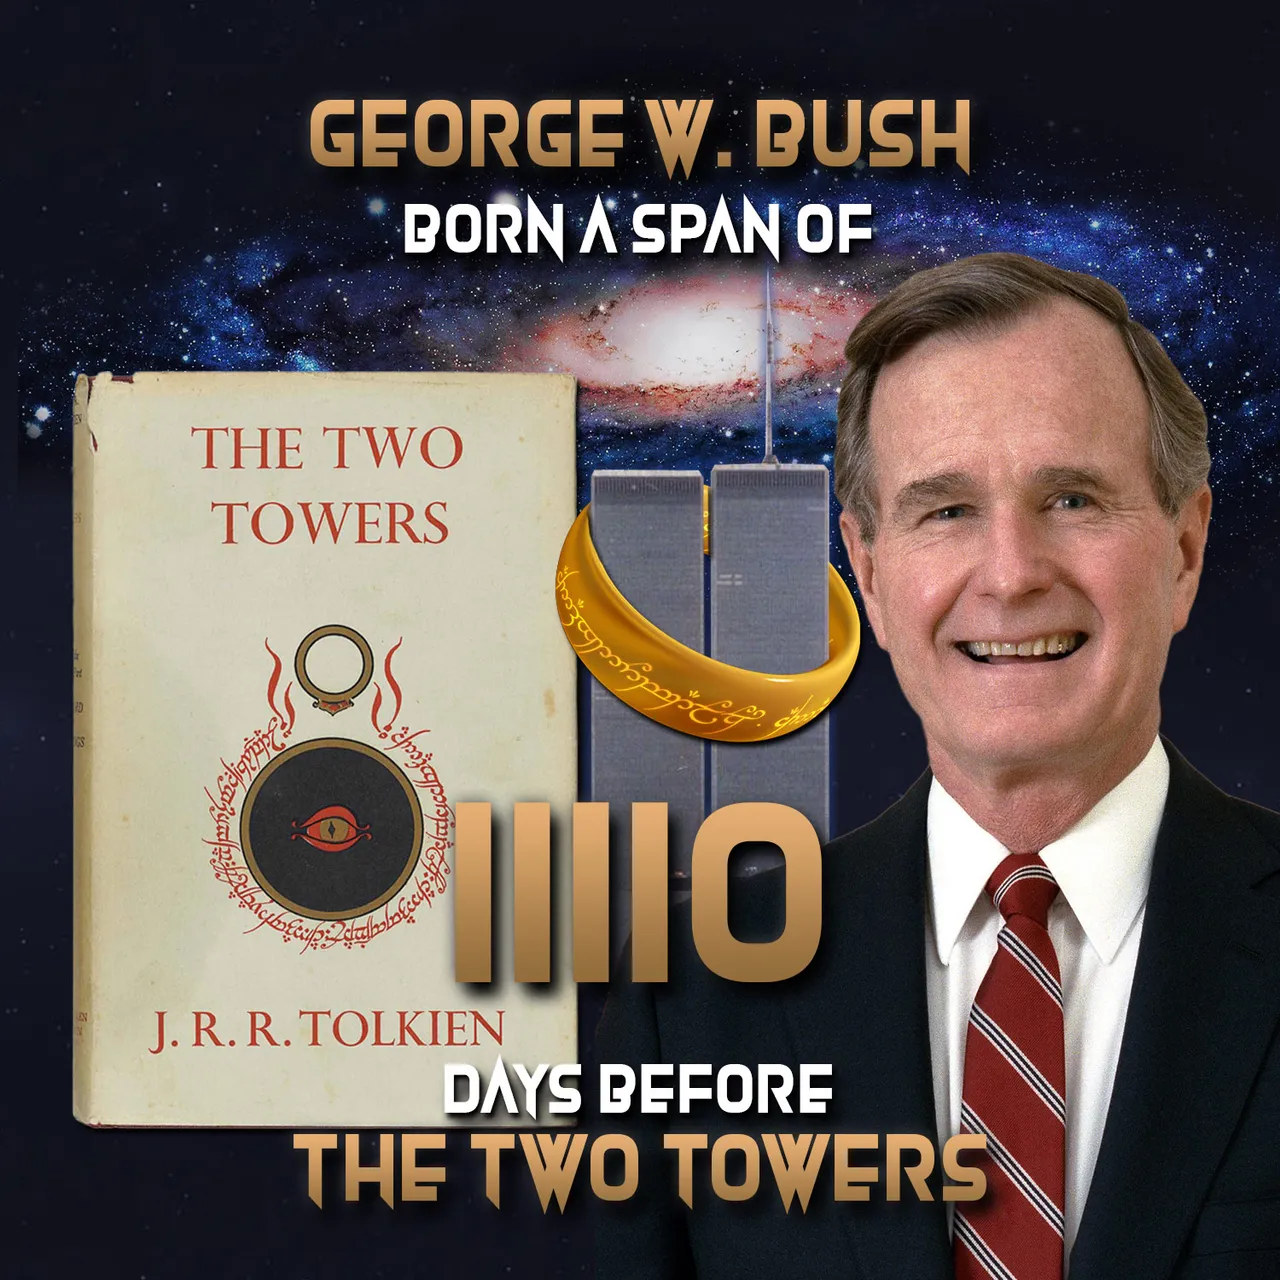 APX George H W Bush 11110 The Two Towers.jpg